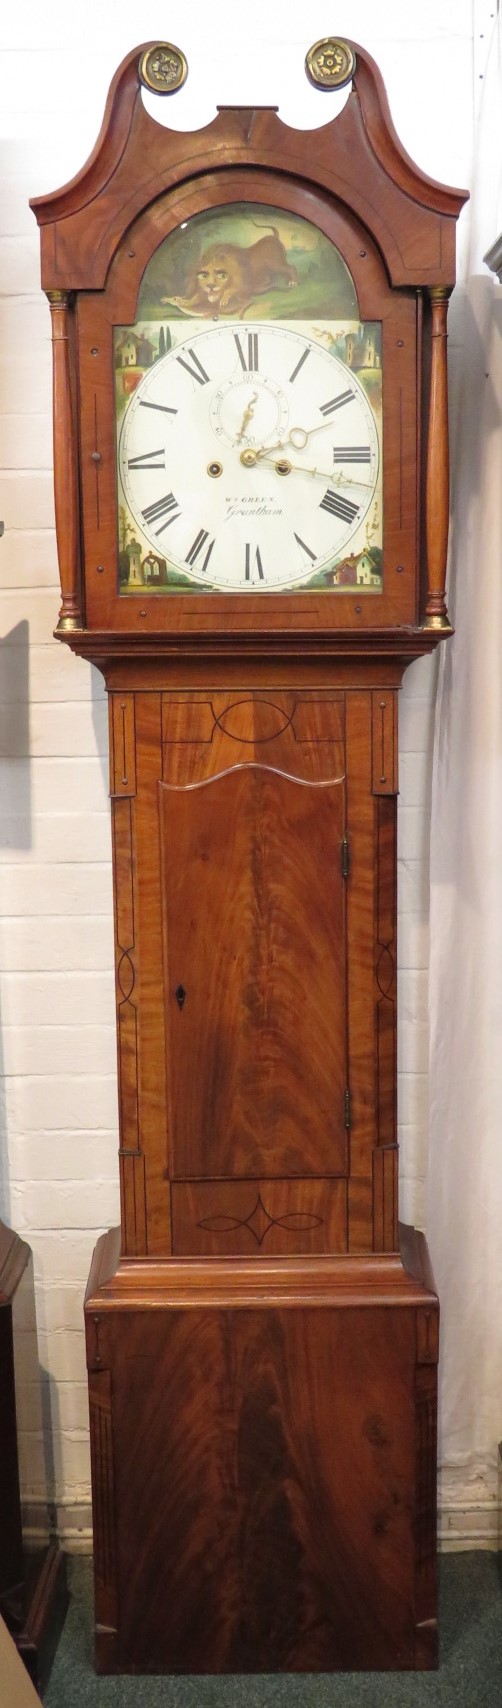 A 19th century eight-day long case clock with automaton dial, the mahogany case with small